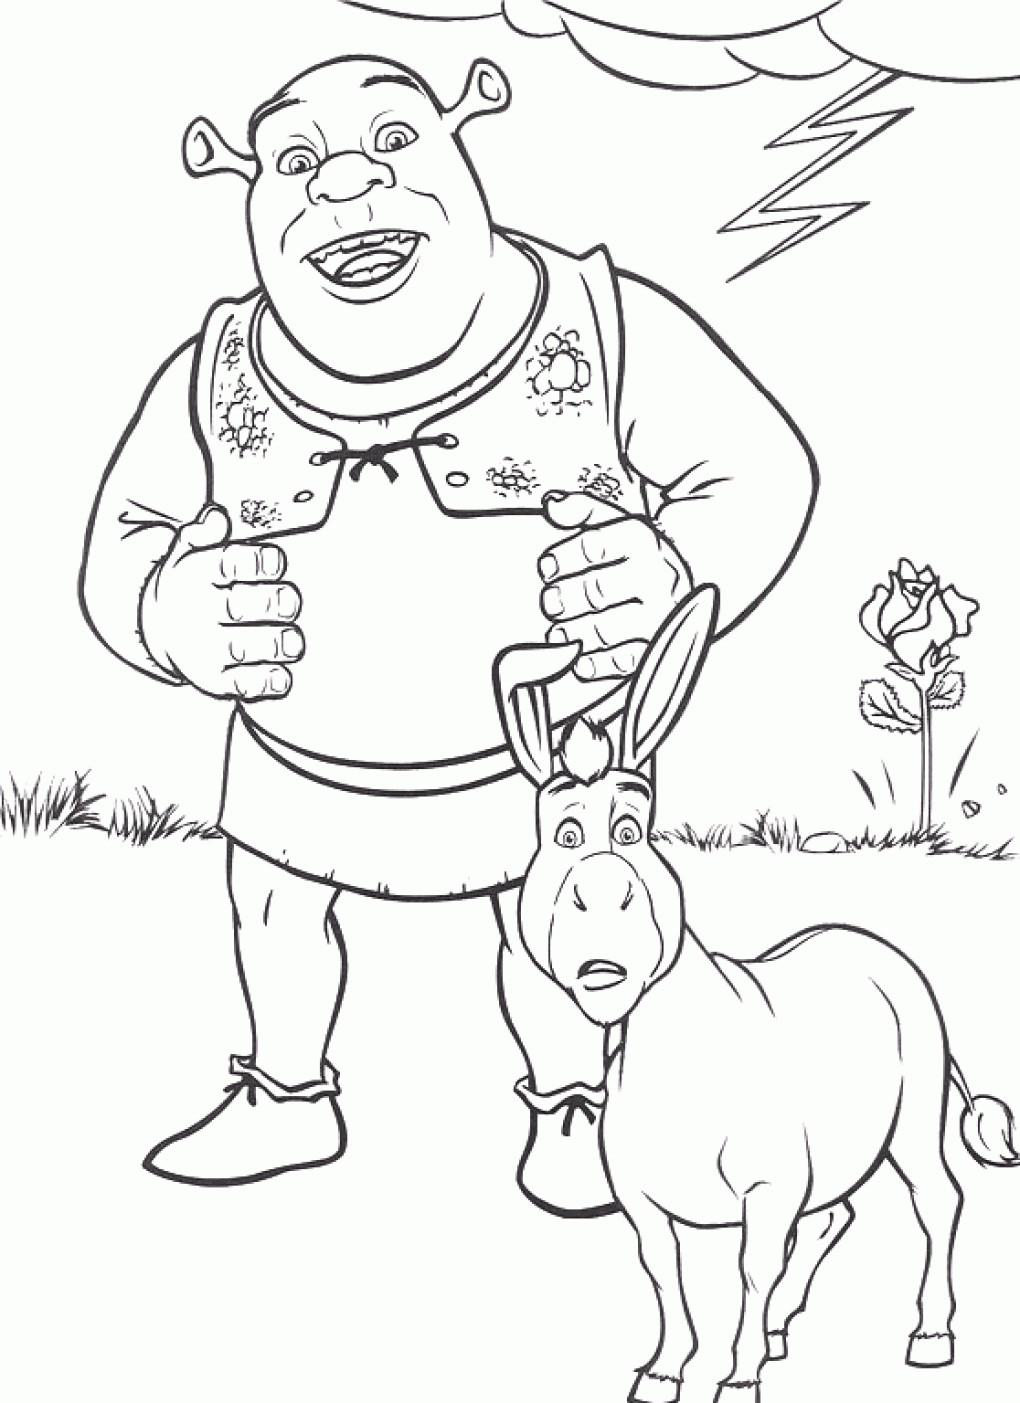 Kids On Line Coloring Pages
 Free Printable Shrek Coloring Pages For Kids